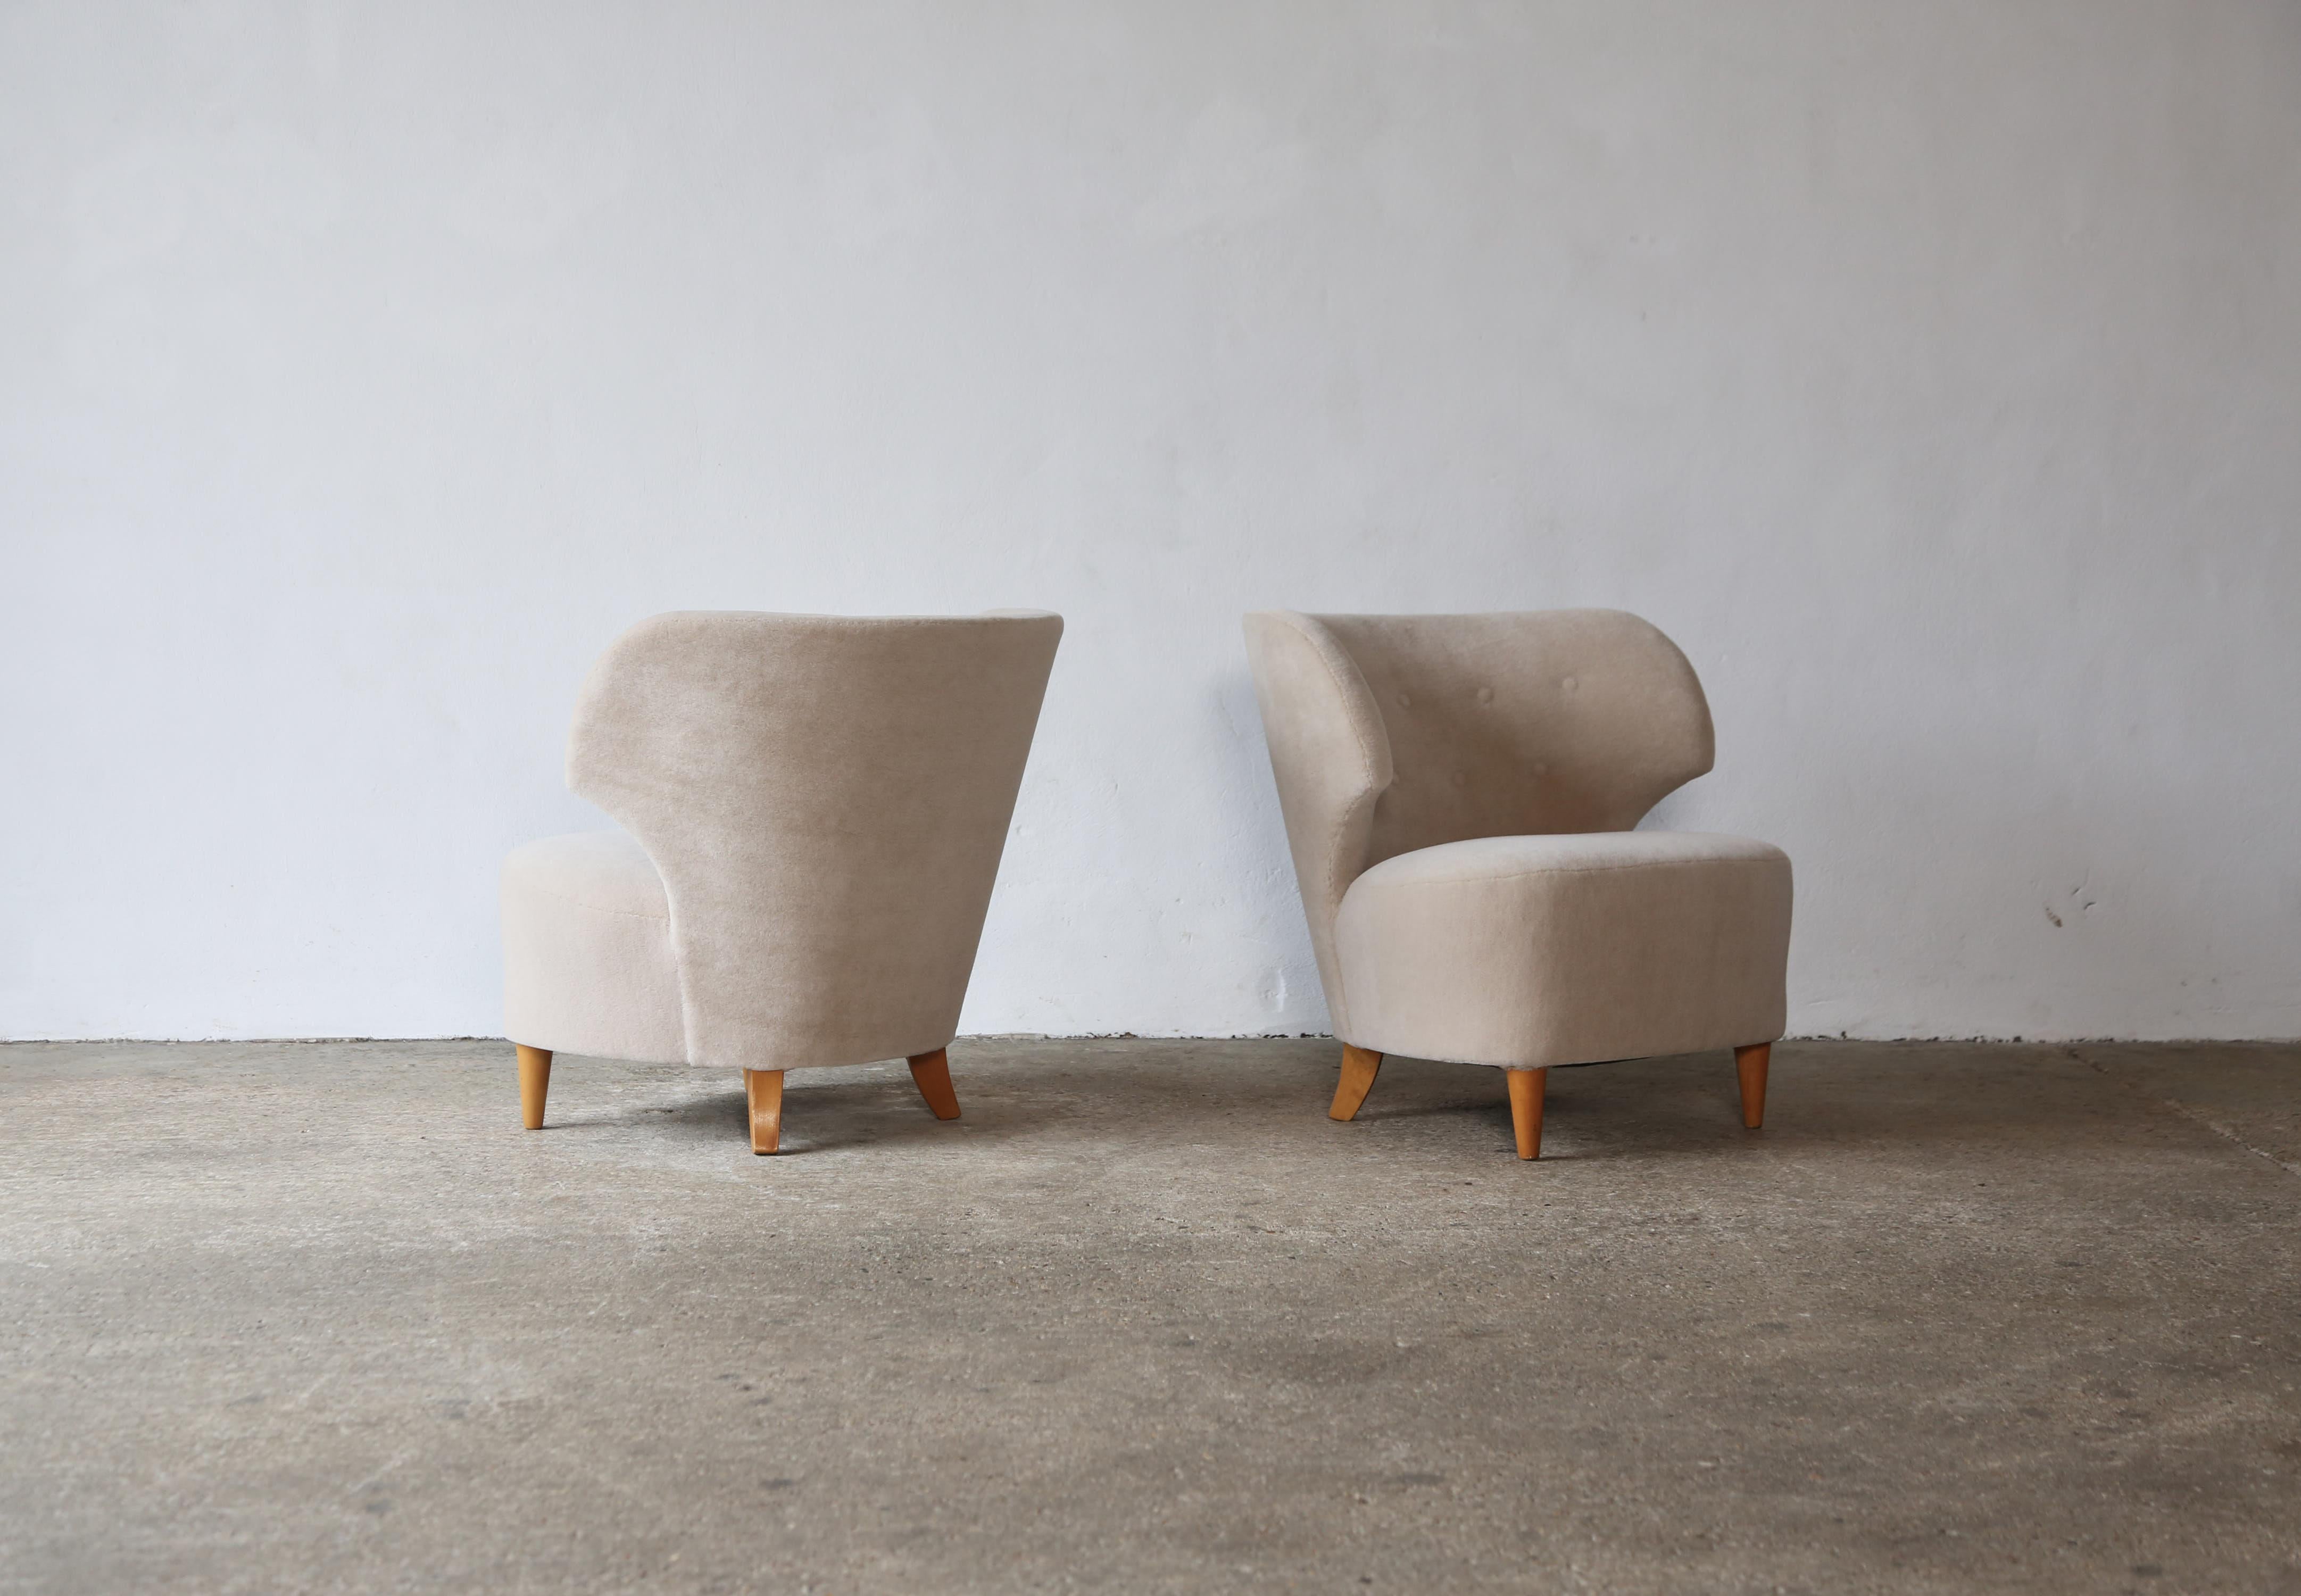 Pair of Carl-Johan Boman Chairs, Finland, 1940s, Newly Upholstered in Alpaca 2